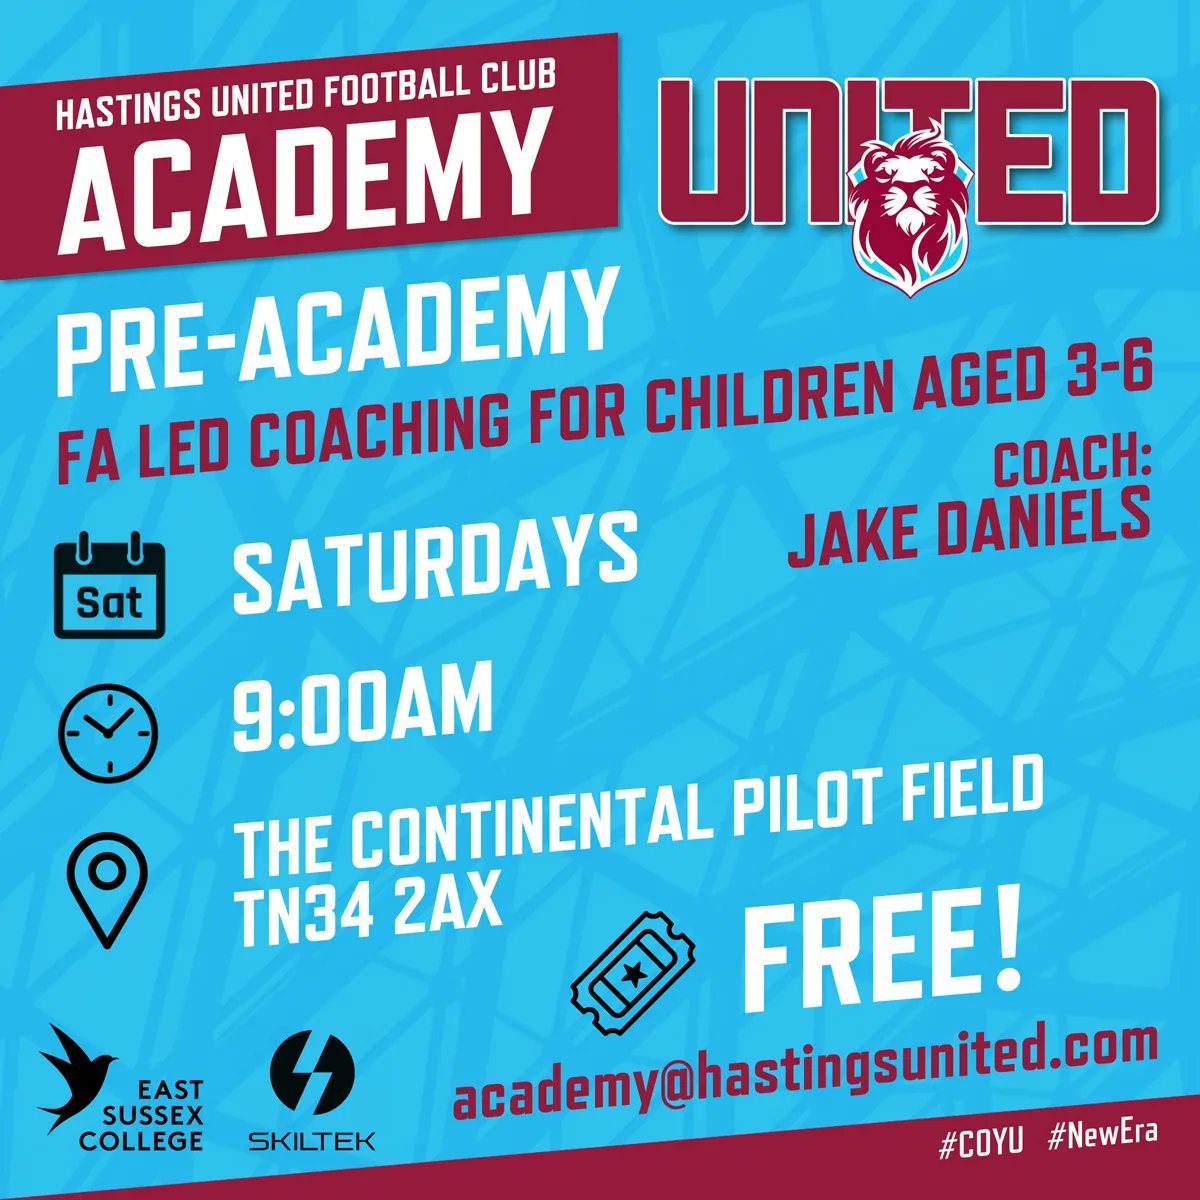 📣 𝐂A𝐋L𝐈N𝐆 𝐀L𝐋 𝐘O𝐔N𝐆 𝐔'𝐒 📅 EVERY SATURDAY ⏰ 9:00am 📍 THE CONTINENTAL PILOT FIELD 🎫 FREE (JUST TURN UP) FA led coaching for Children aged 3-6 with Jake Daniels For more information email academy@hastingsunited.com #COYU #HUFCPreAcademy #HUFC